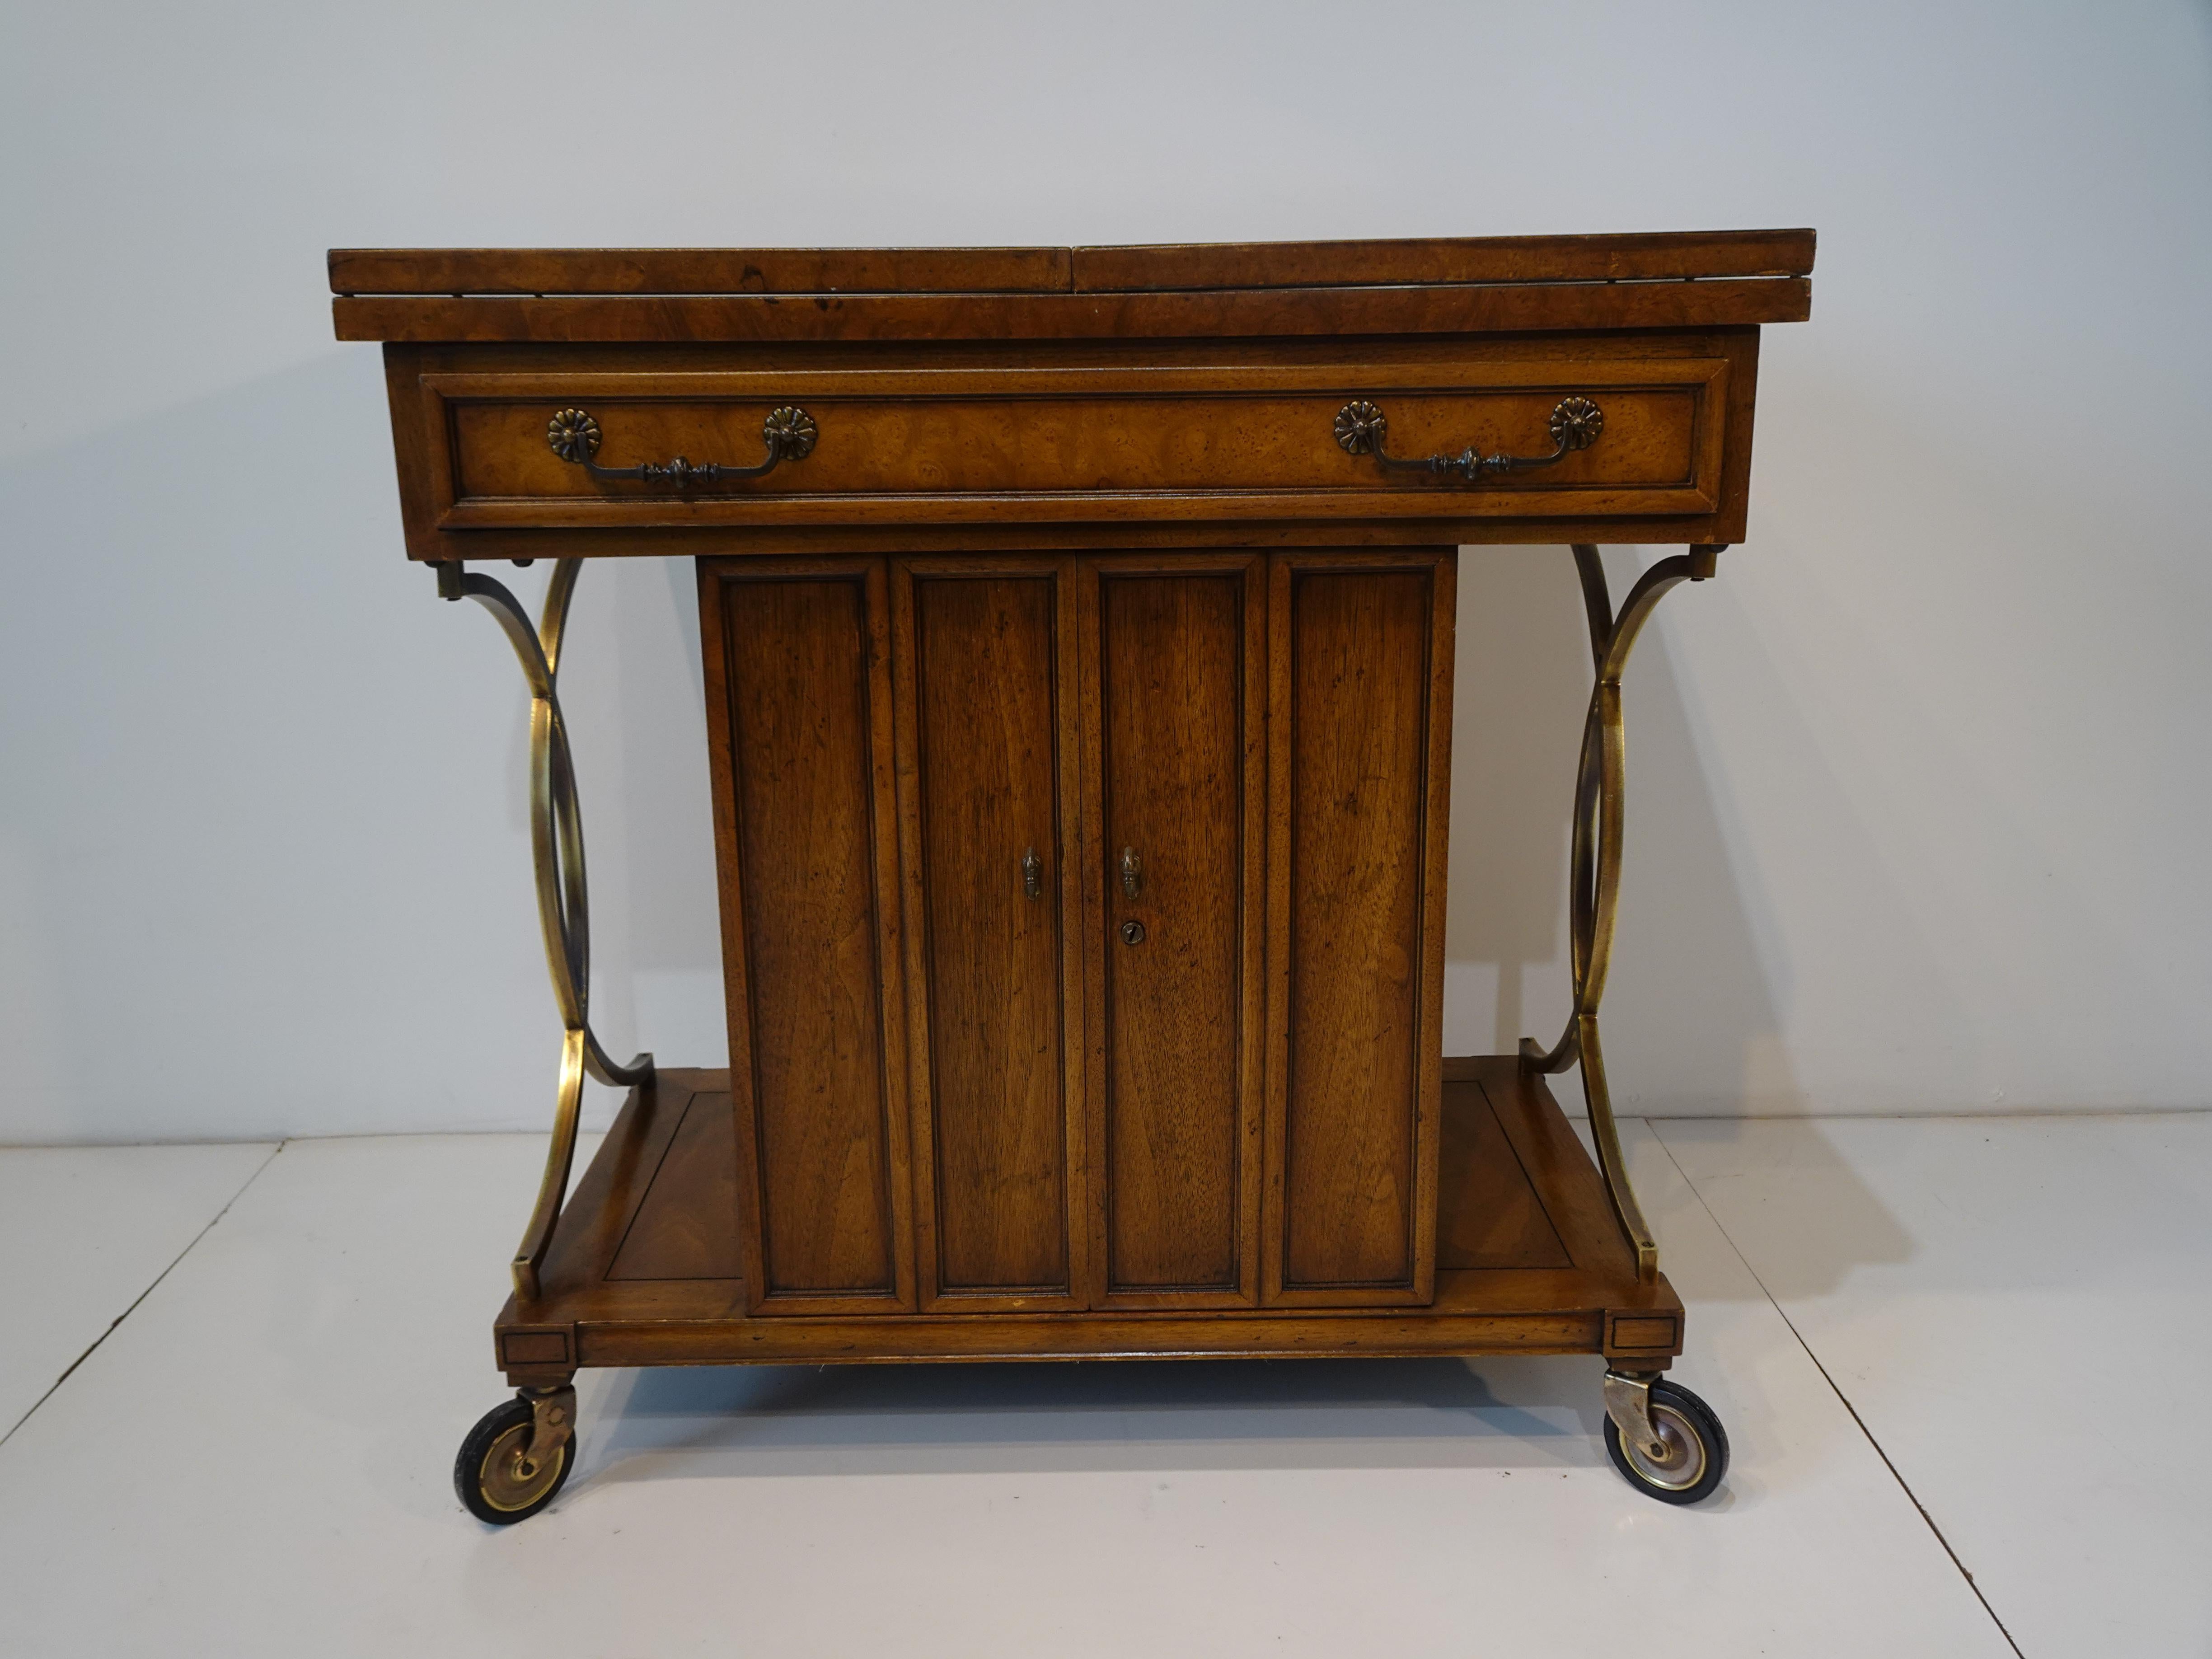 A very well constructed mahogany and burl wood rolling bar cart with expanding flip top having a satin black laminate surface and pull out stretchers for support. Below the top is a lower long center drawer with double doors a shelve, storage and